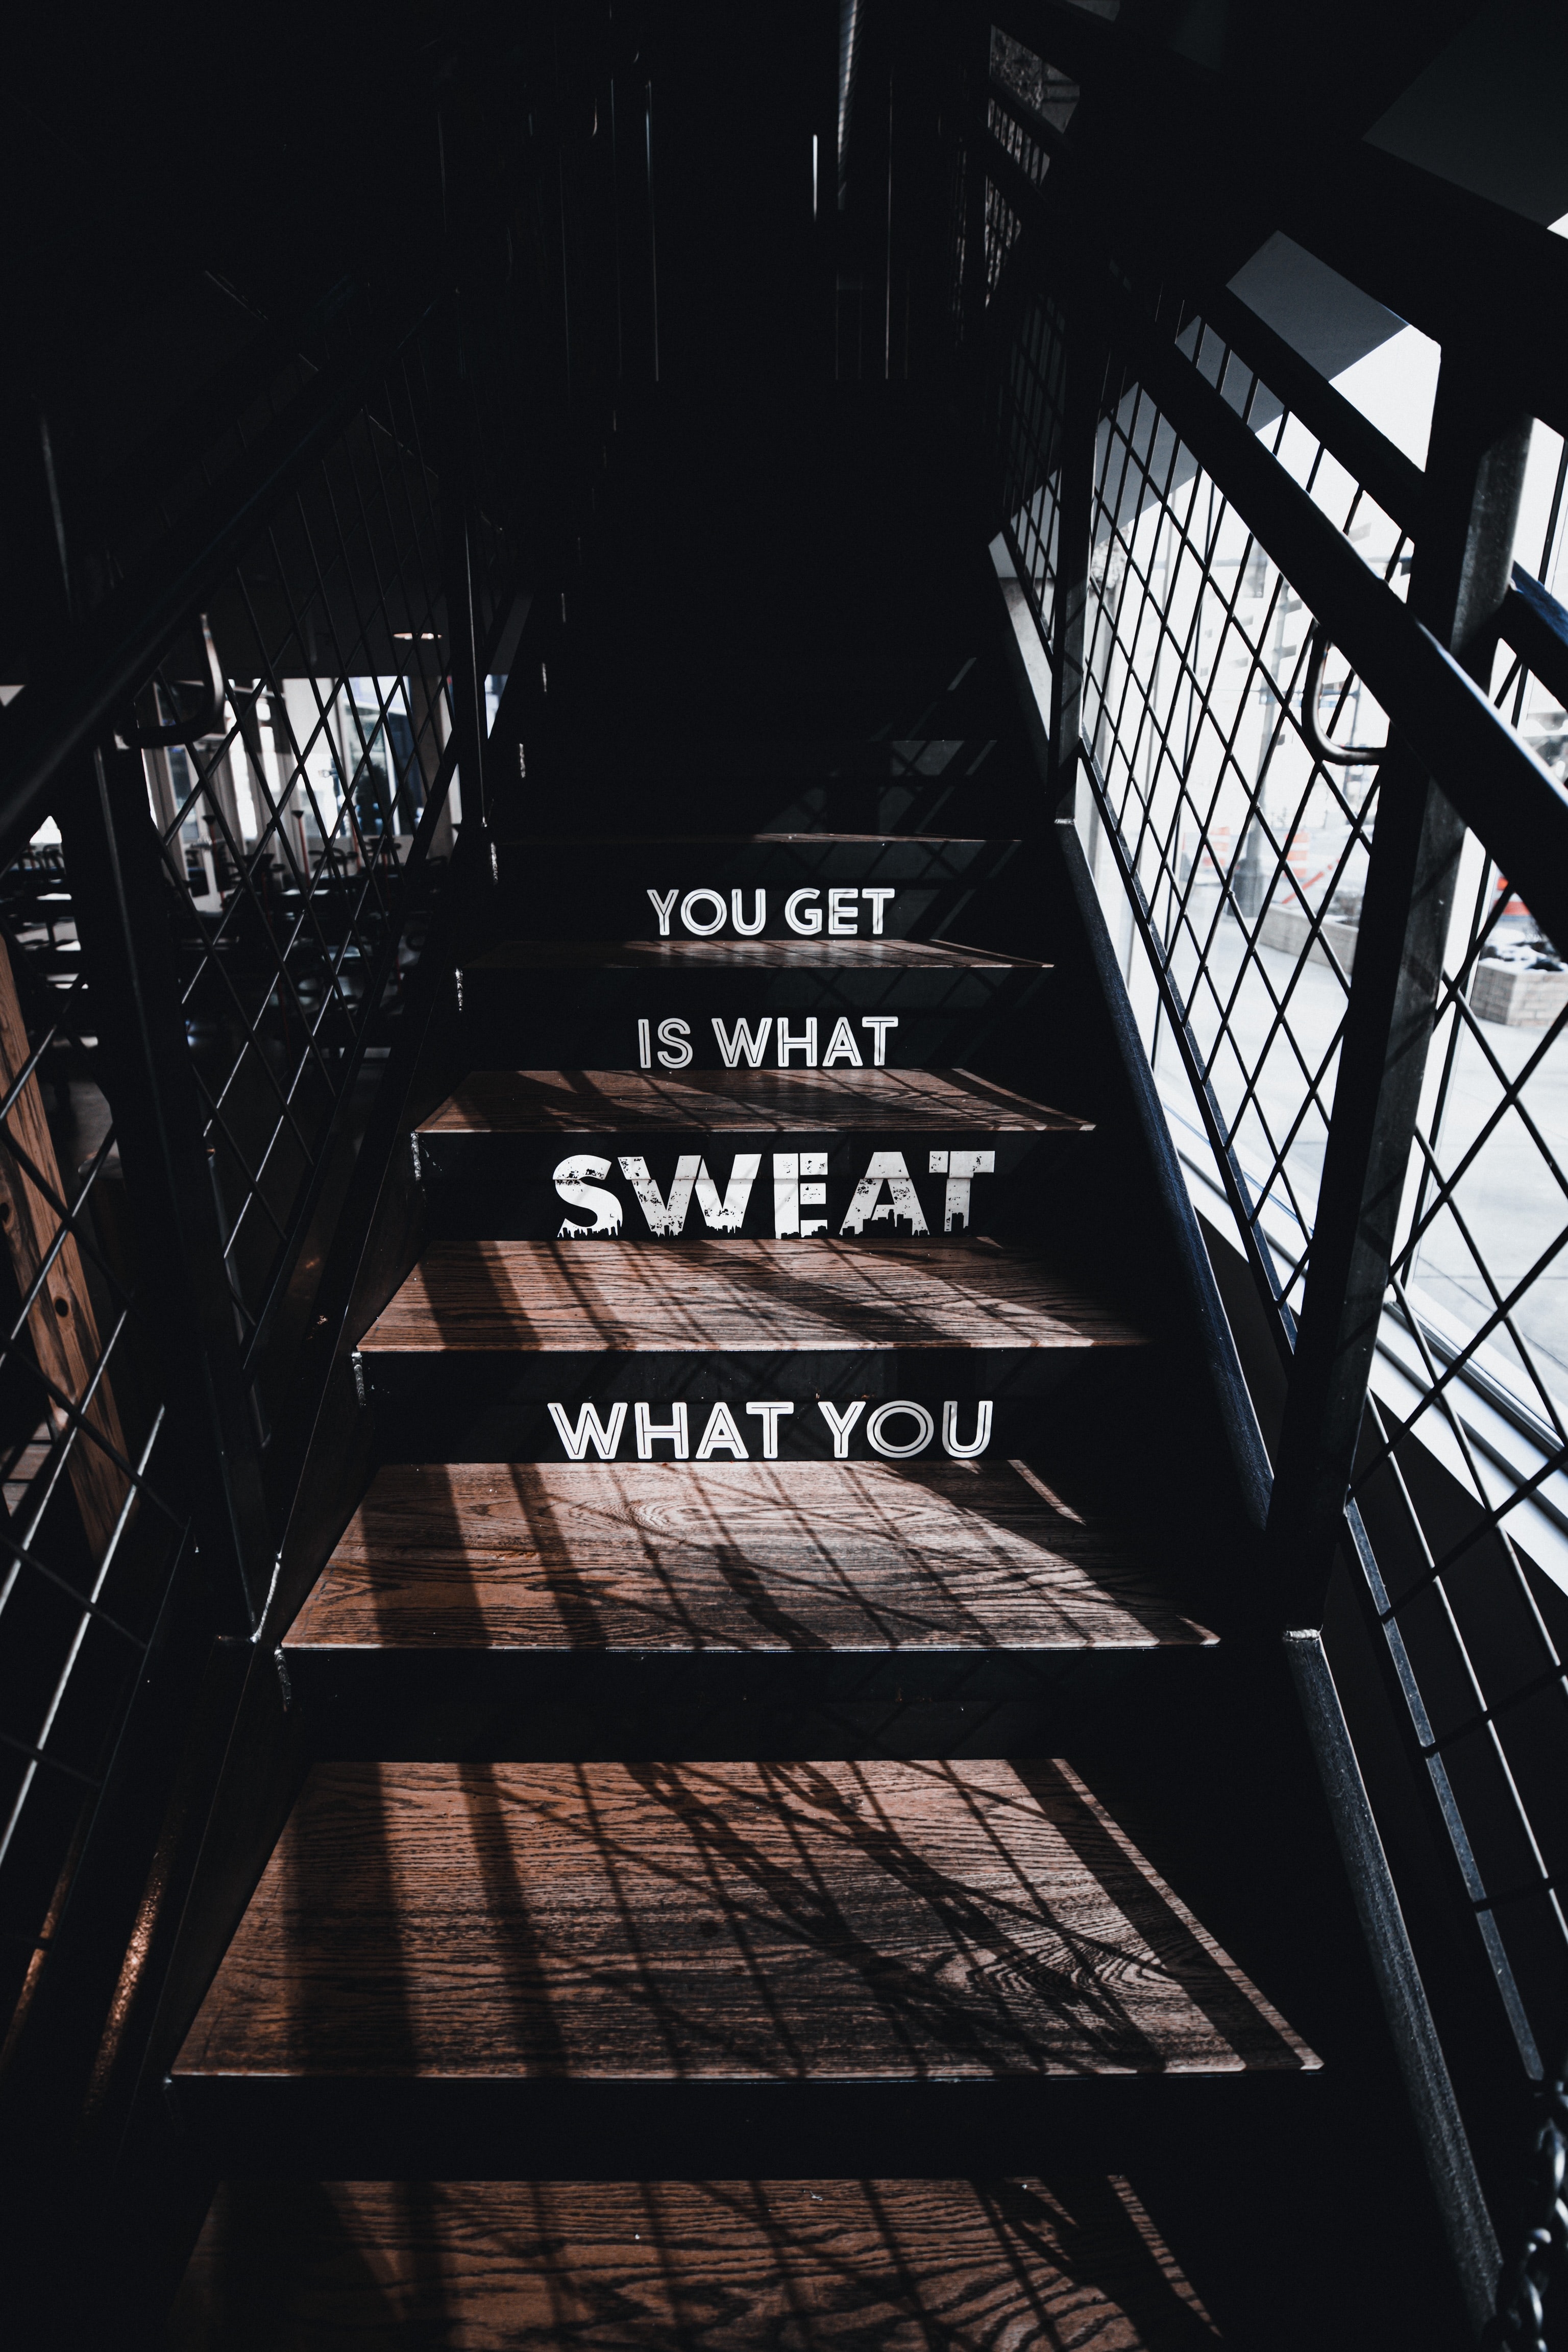 android motivation, quote, inspiration, quotation, inscription, words, stairs, ladder, text